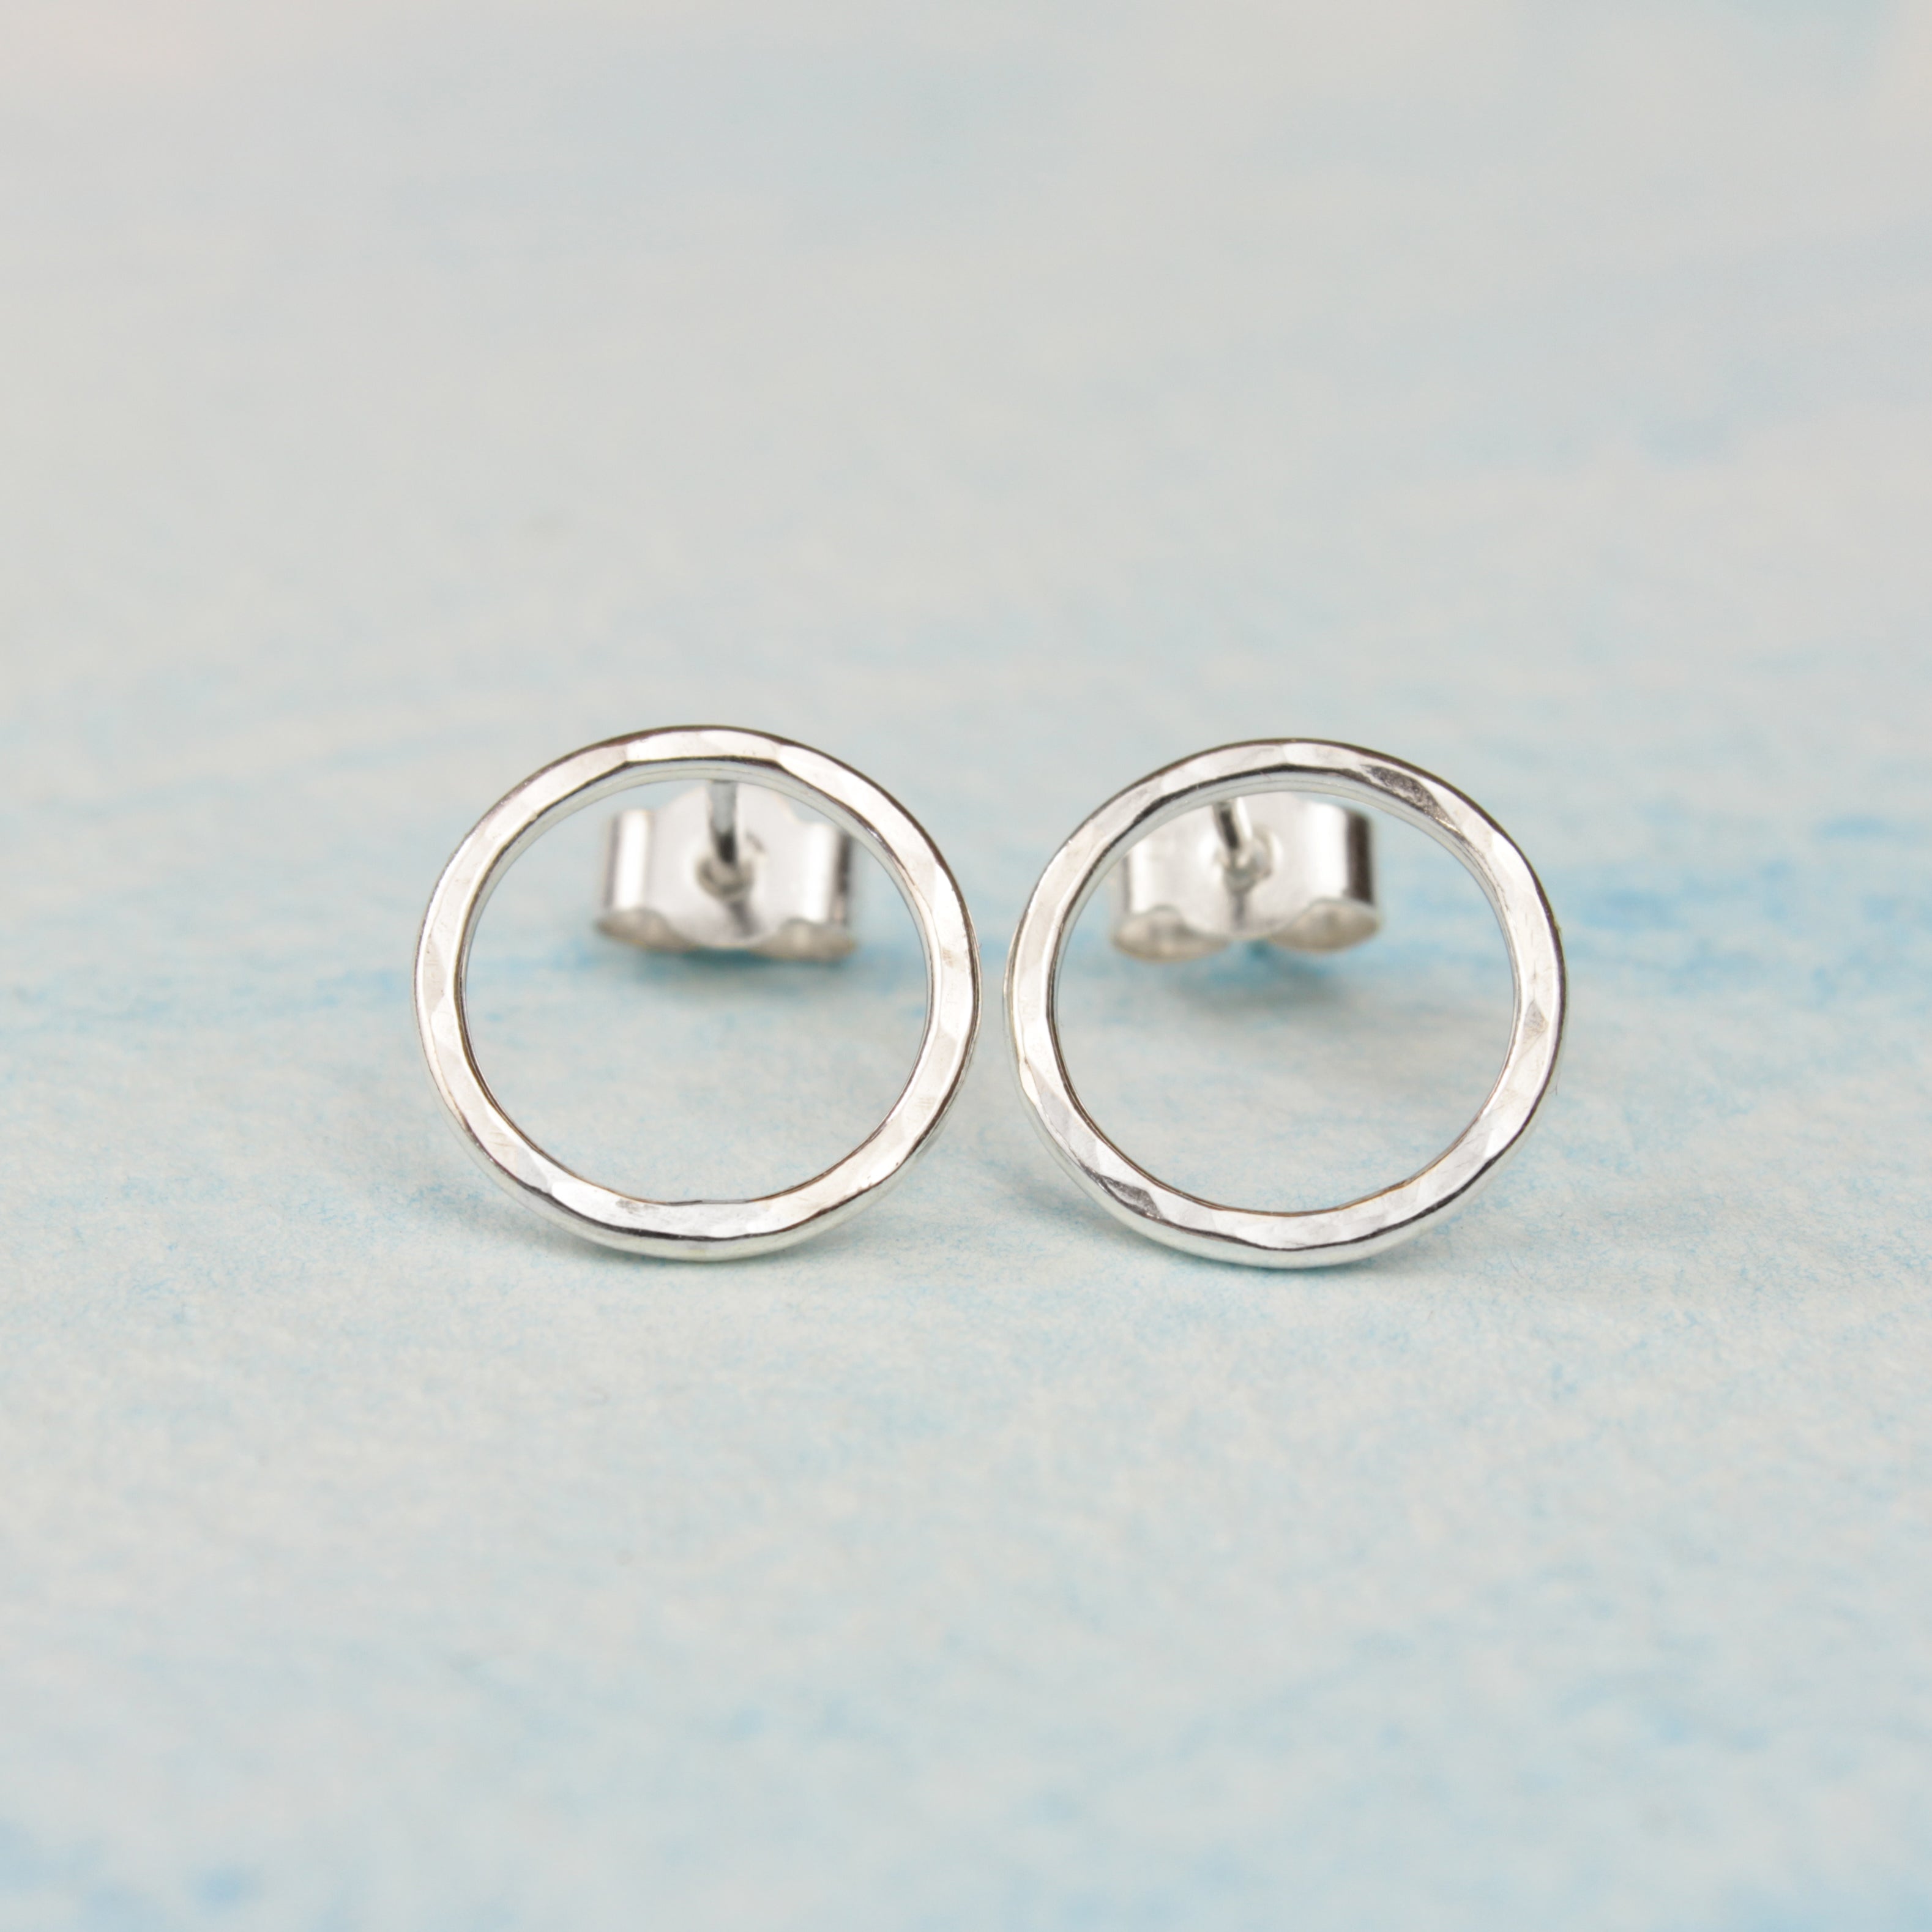 Hammered Silver Circle Stud Earrings, Small